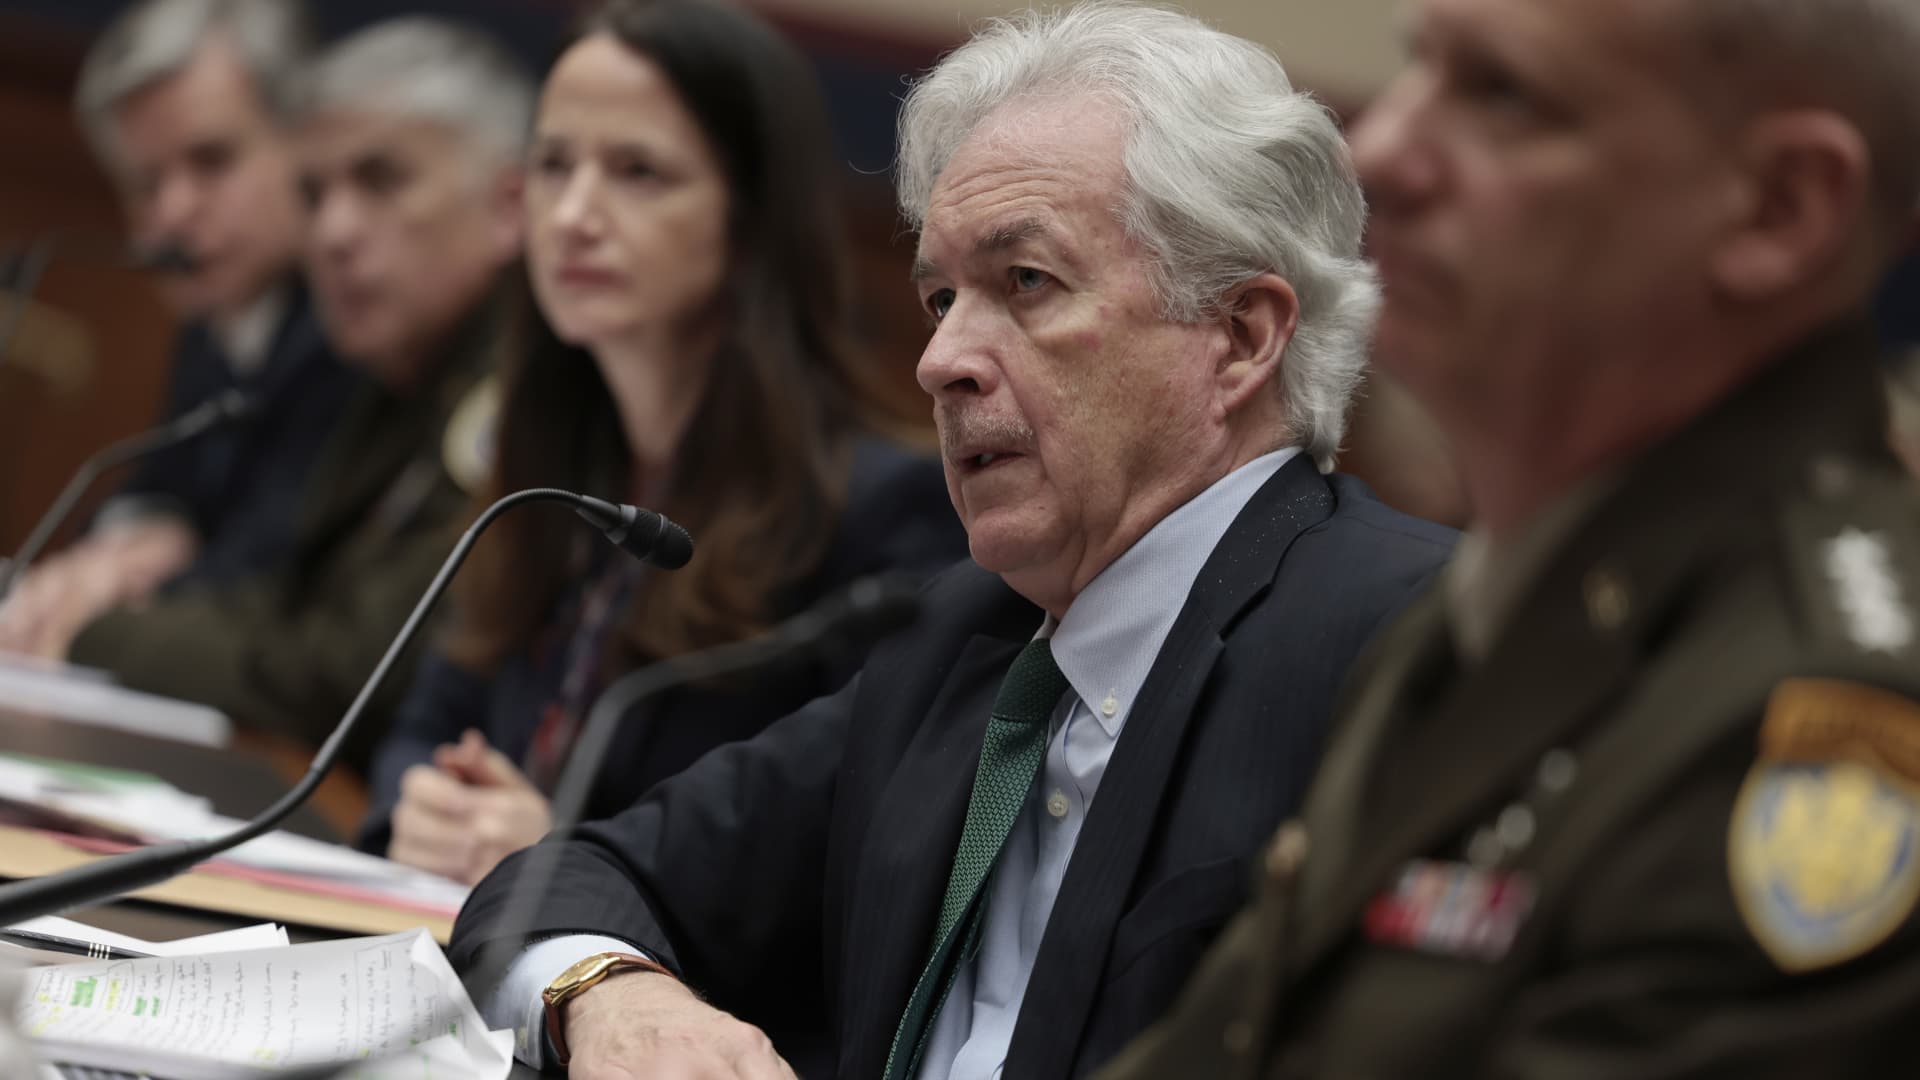 CIA Director William Burns speaks during a House Intelligence Committee hearing in the Rayburn House Office Building on March 08, 2022 in Washington, DC.